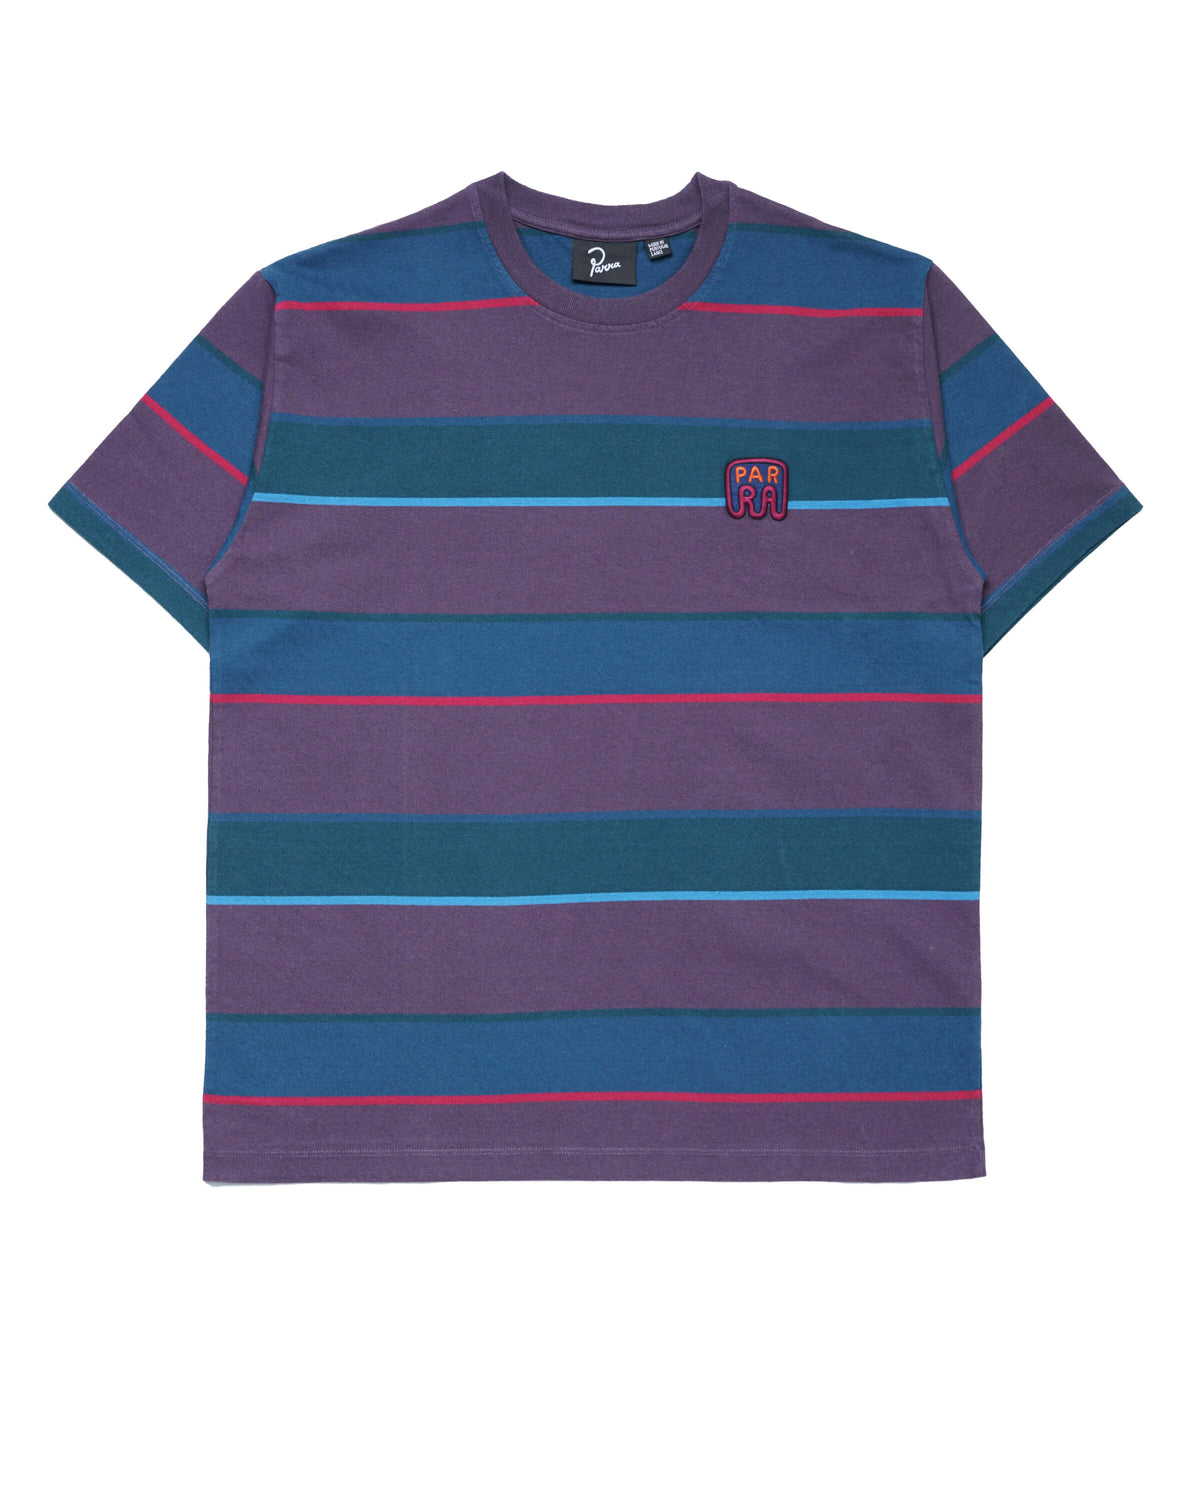 by Parra fast food logo striped t-shirt